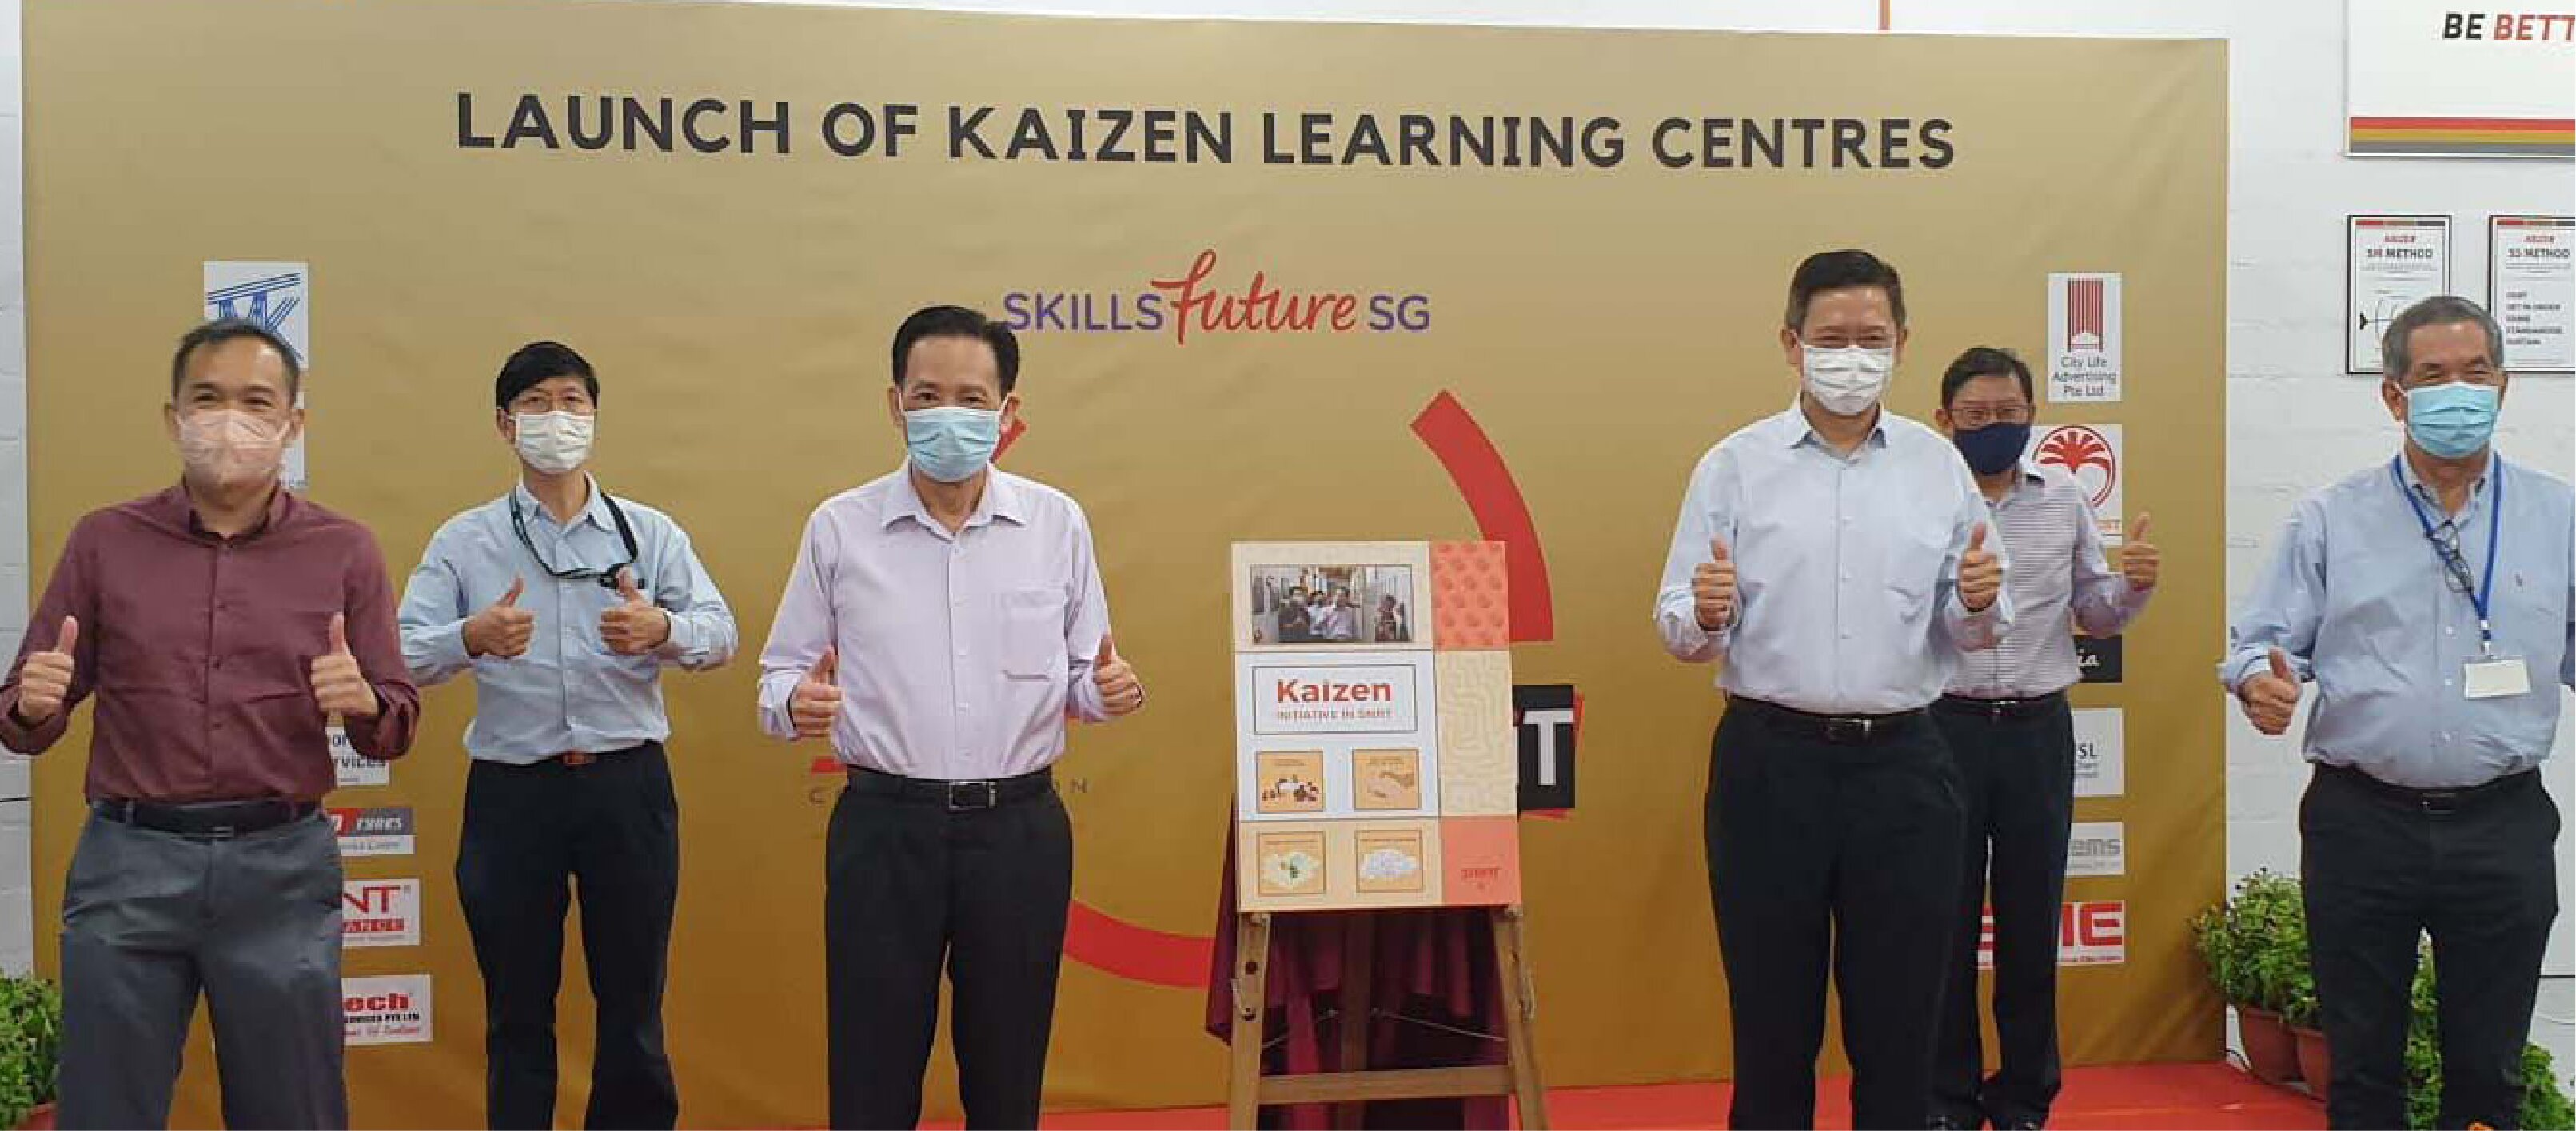 The launch event of Kaizen Learning Centres was attended by Minister for Education Mr Chan Chun Sing and key senior management representatives from SkillsFuture Singapore, SMRT Corporation Ltd, and SIT. (Photo courtesy of SMRT)